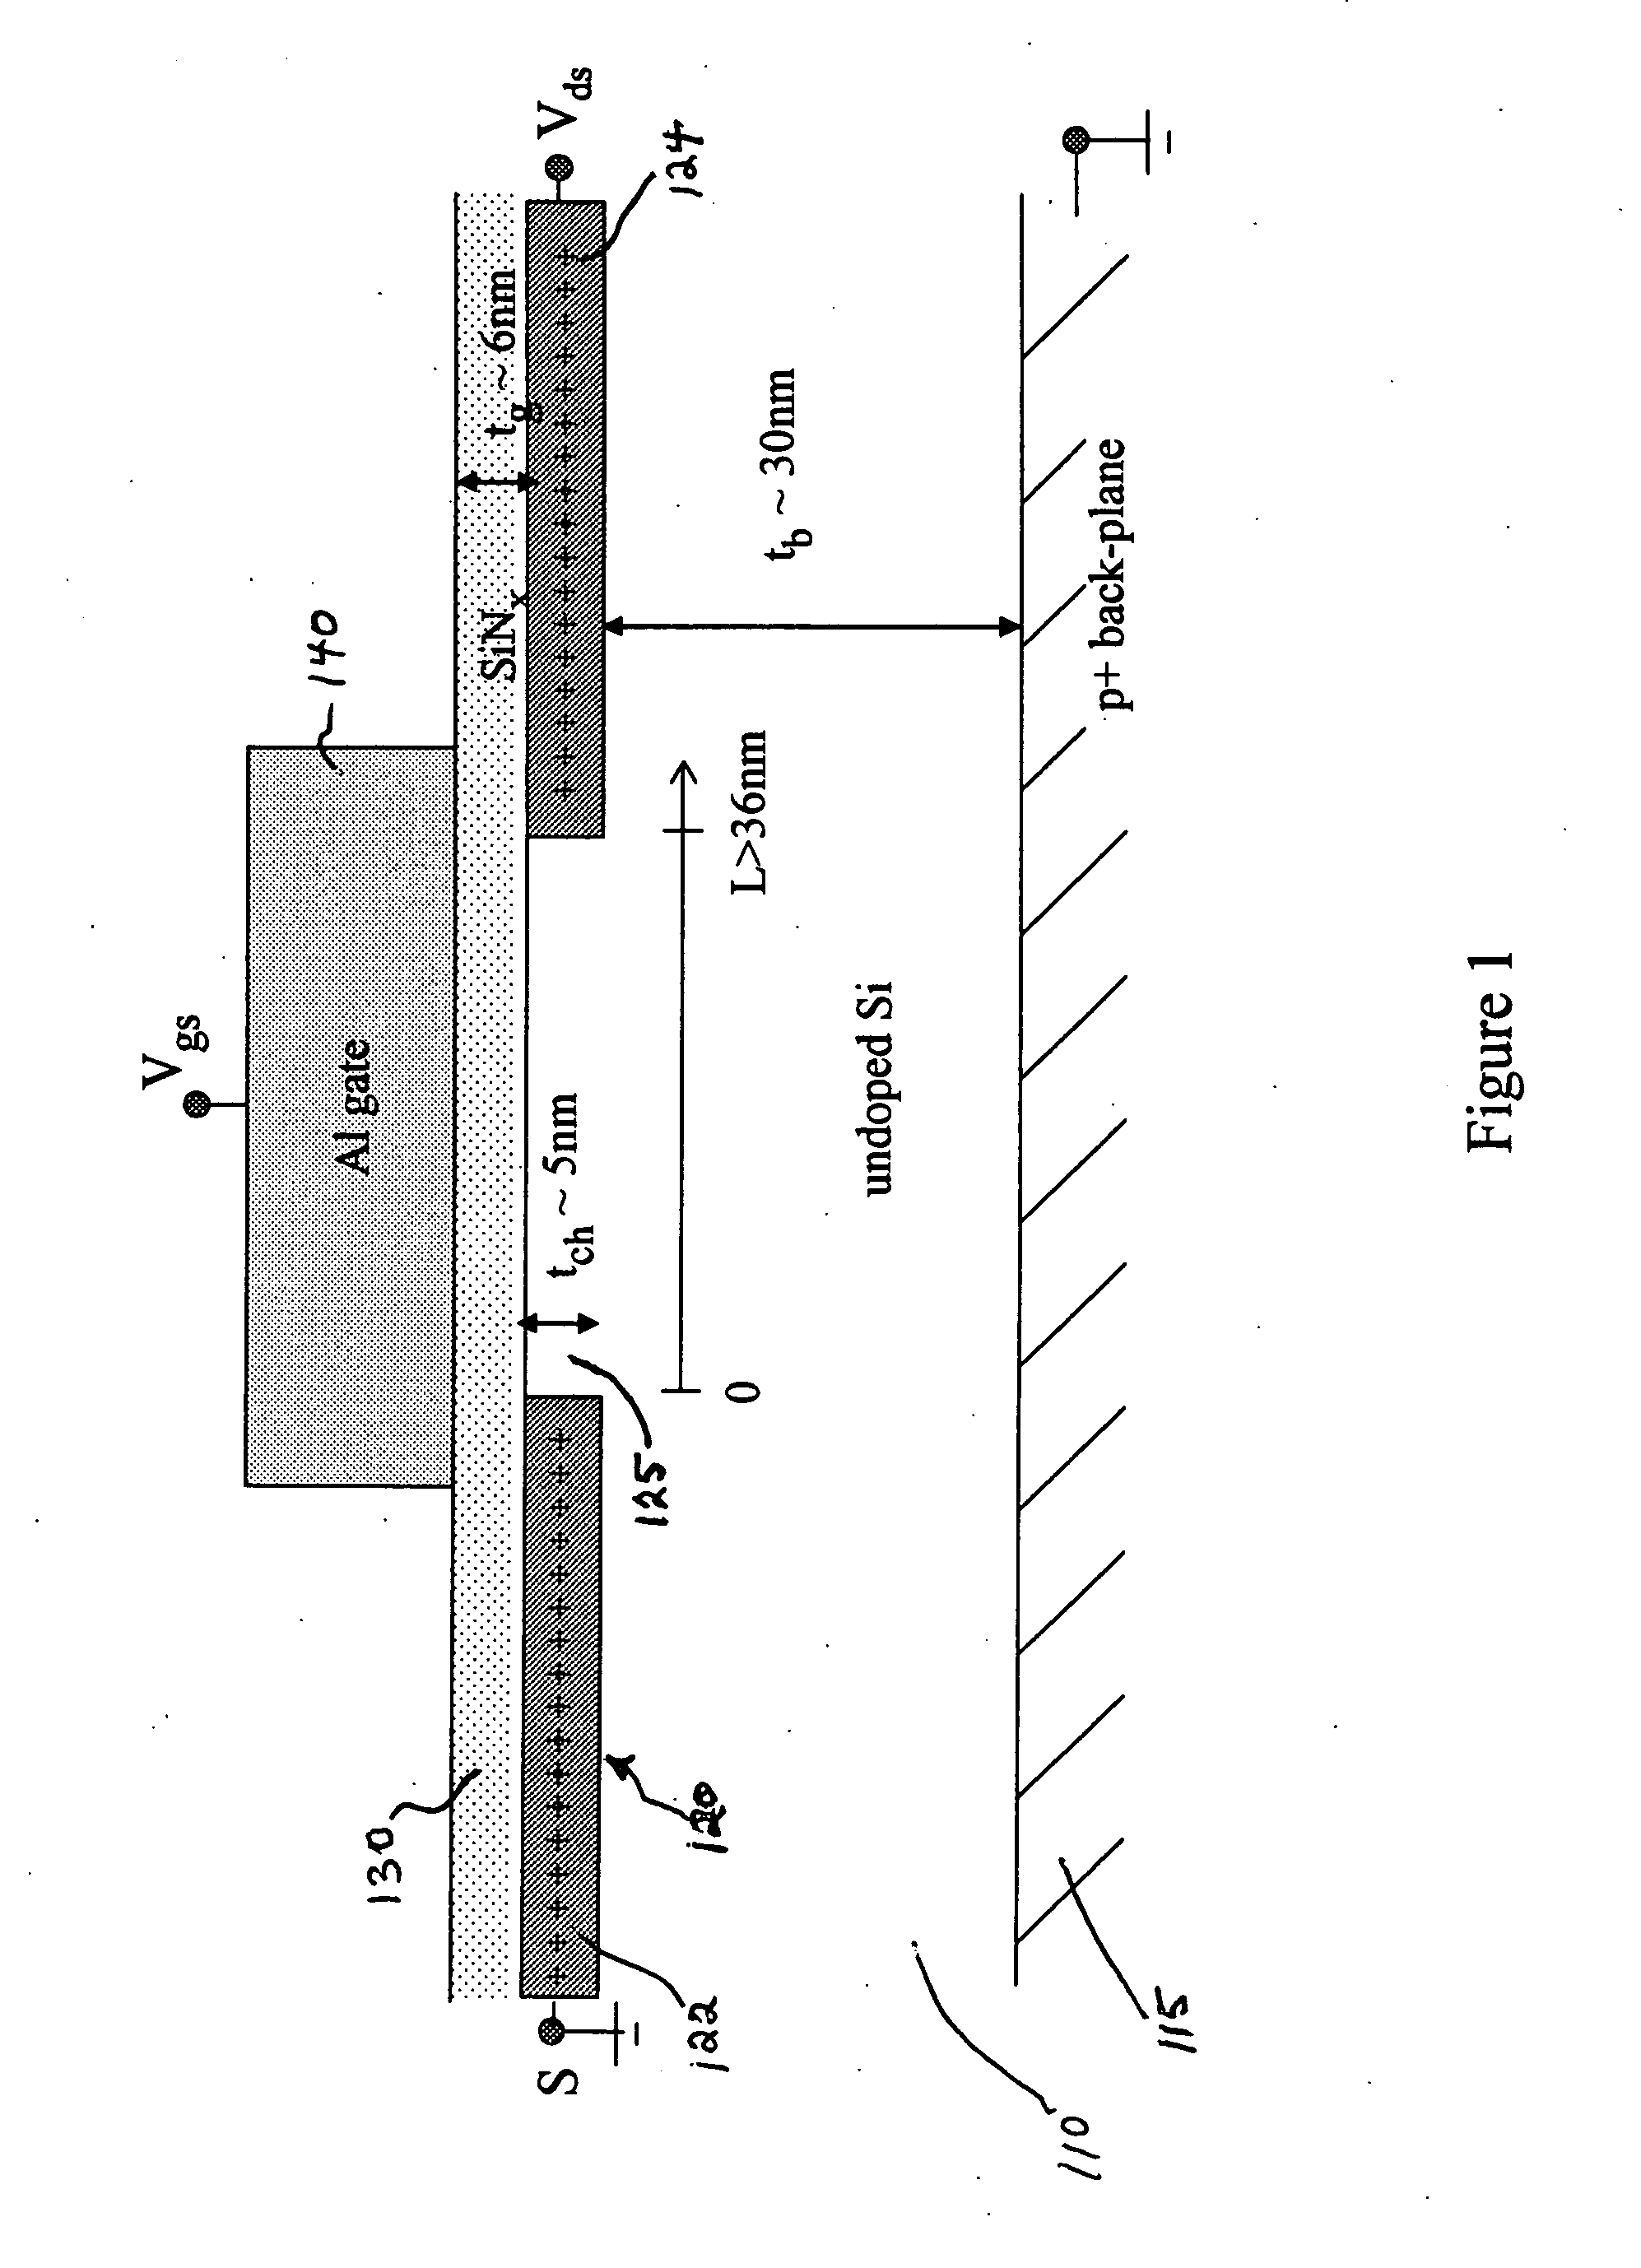 Field effect transistor devices and methods